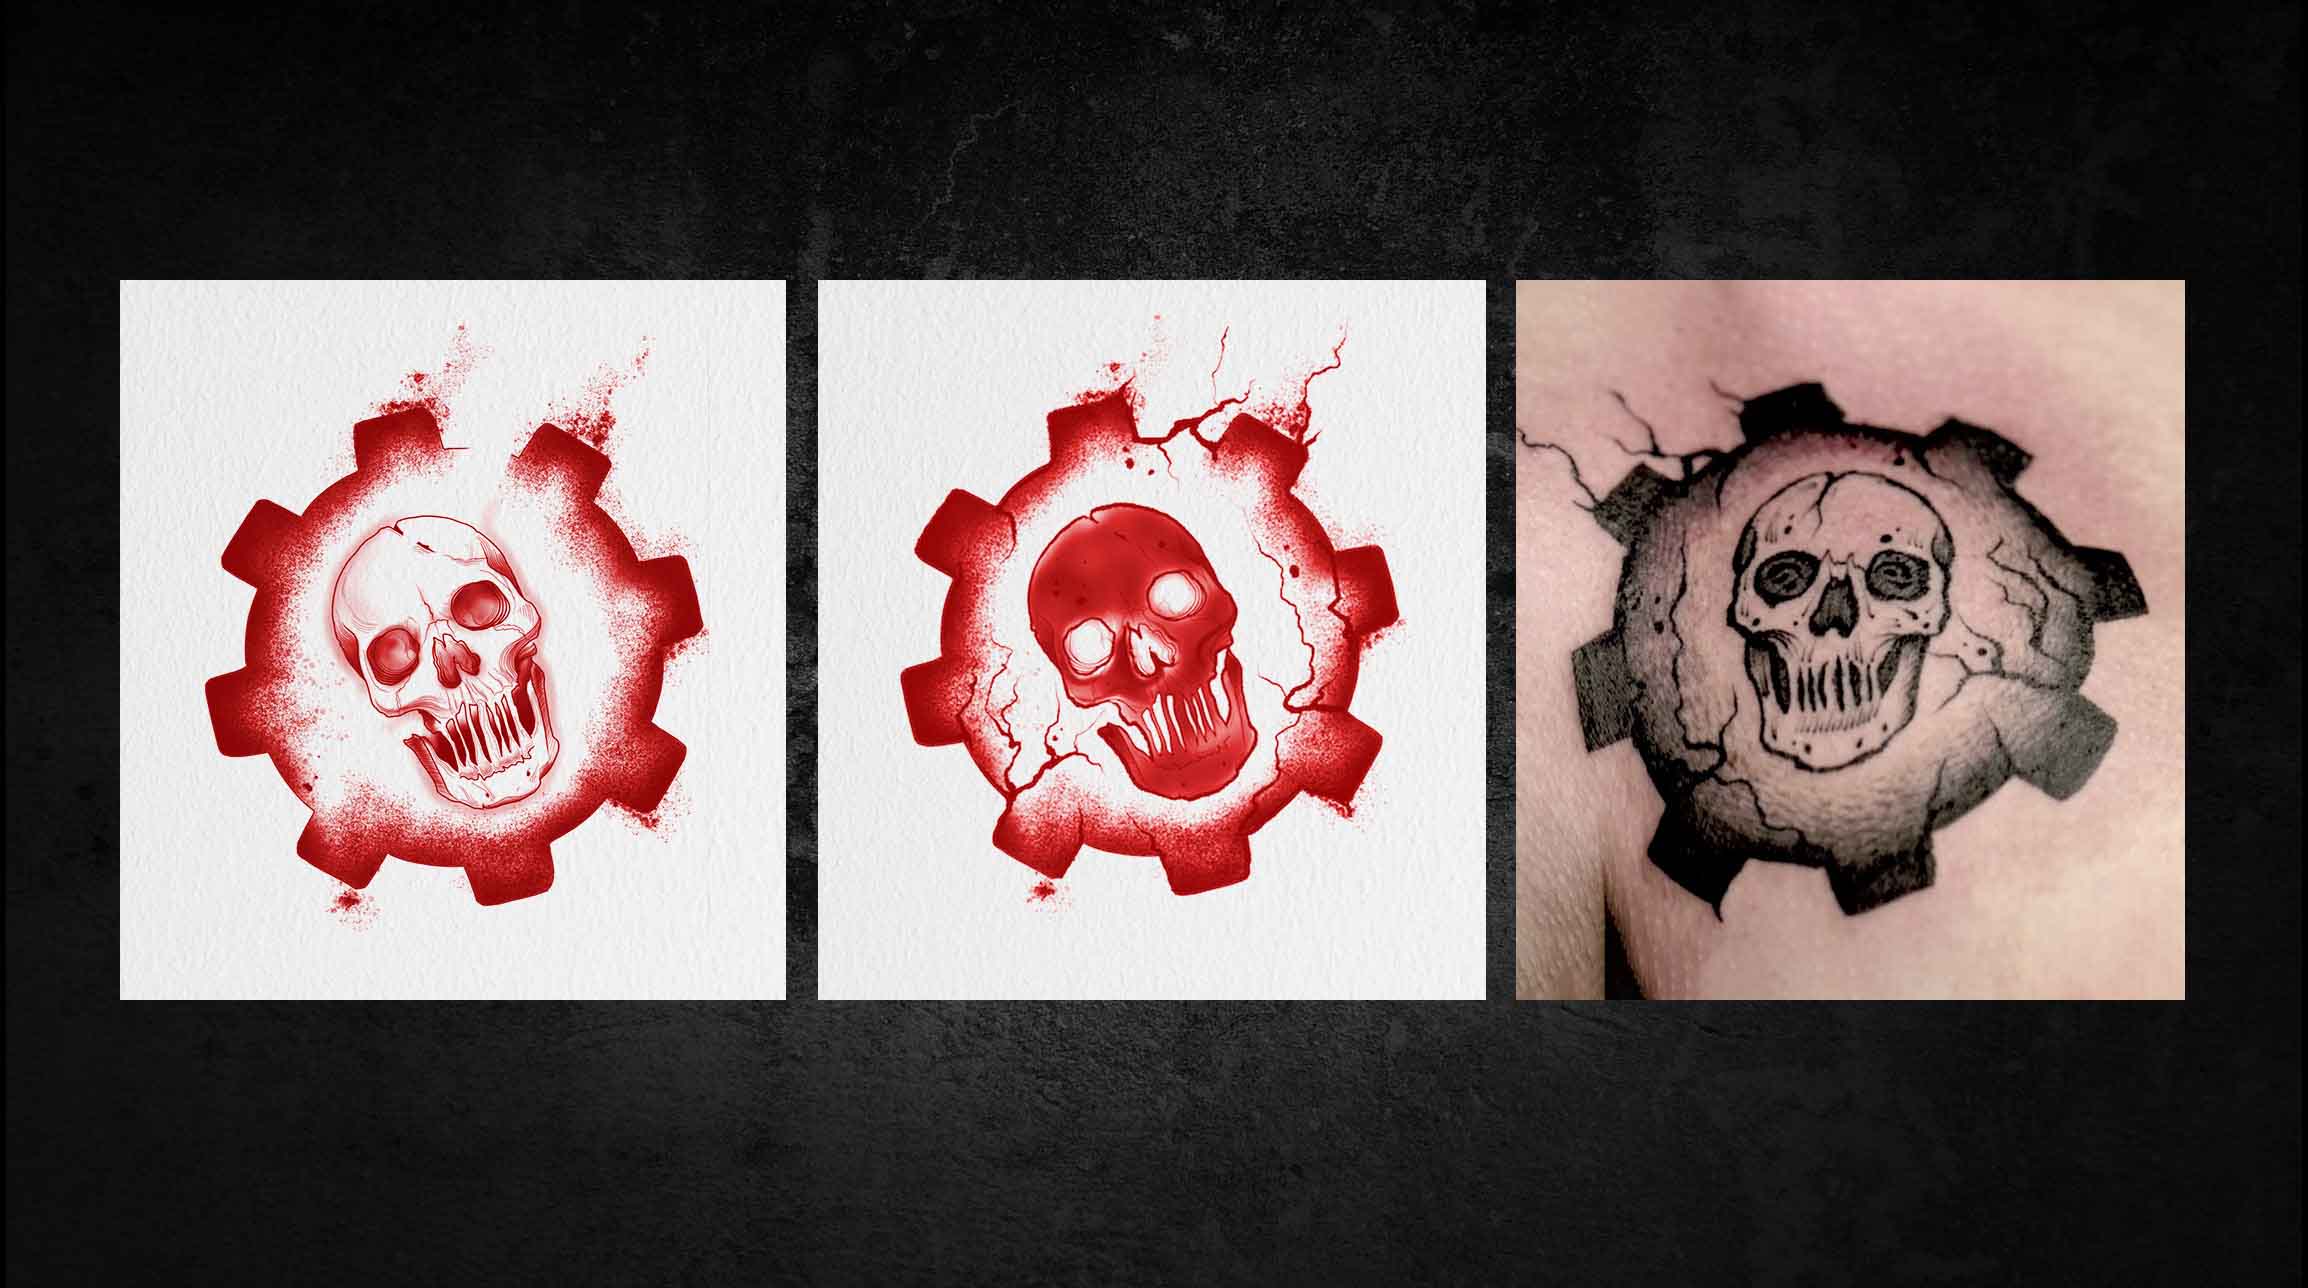 Heres a pic of the Gears of War piece from